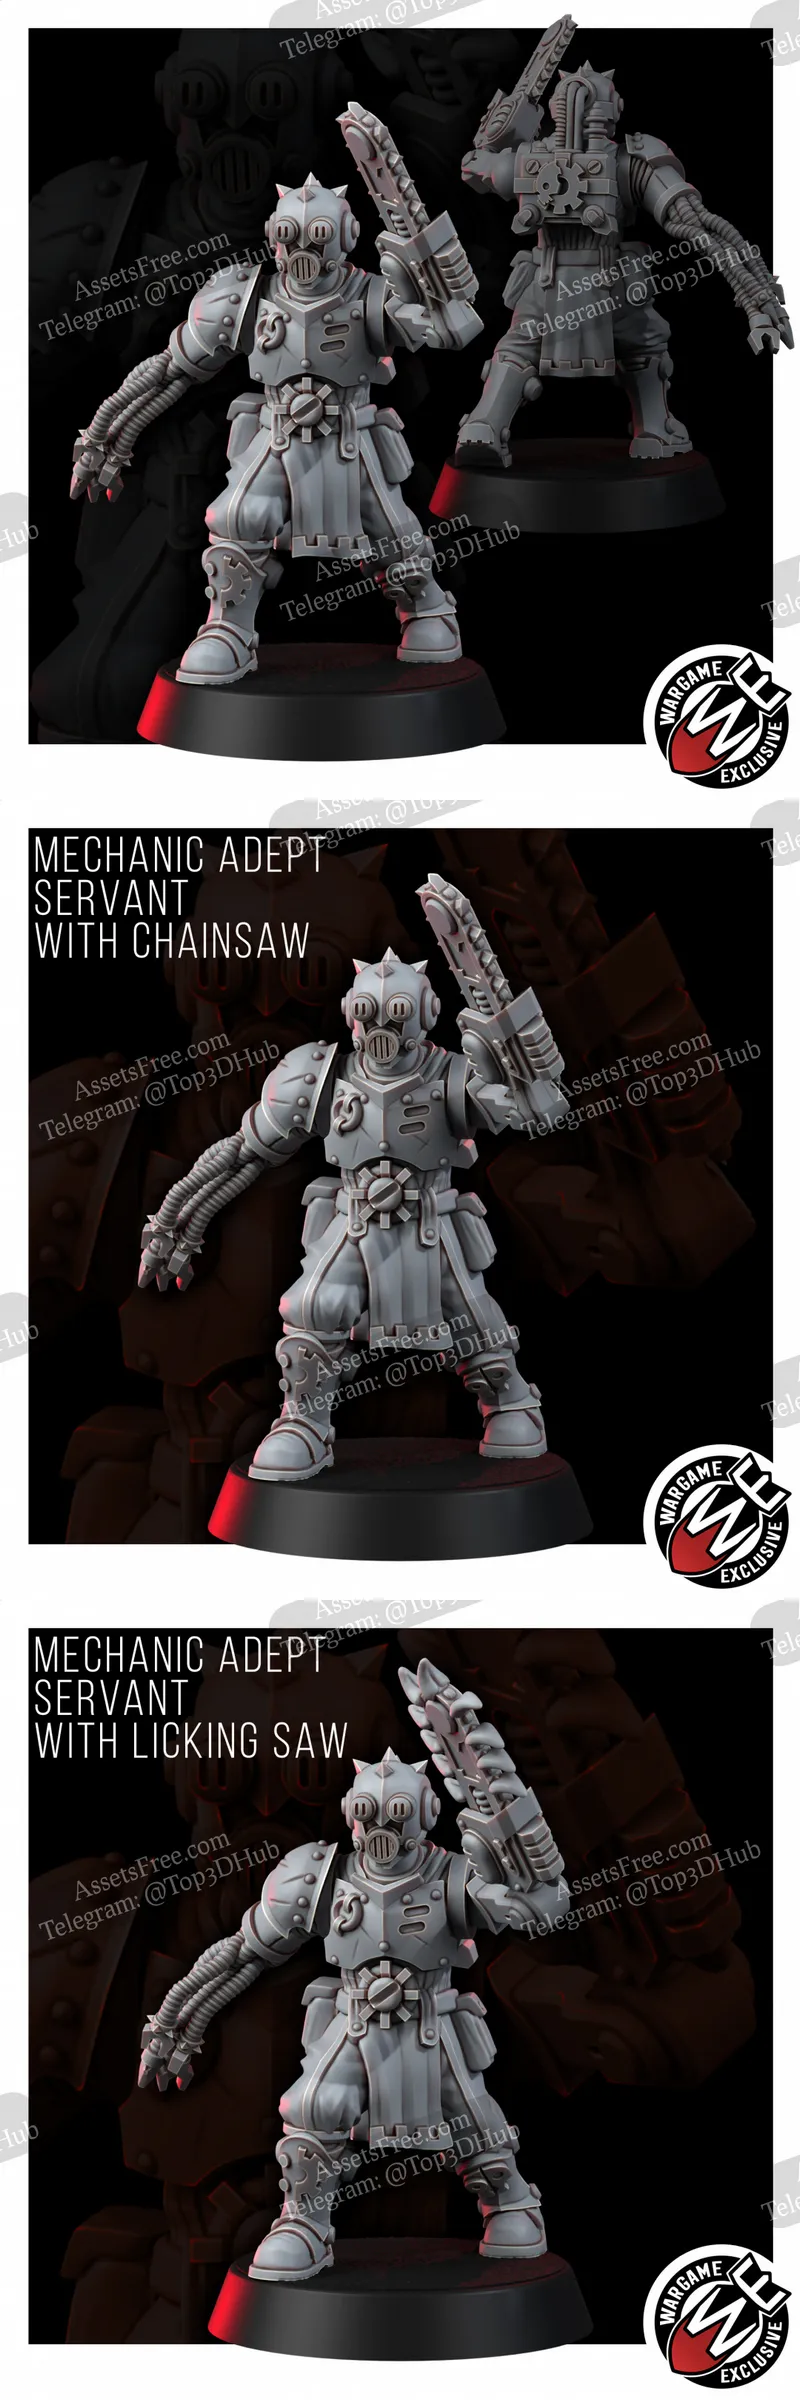 Mechanic Adept Servant With Chainsaw (And Licking Saw)